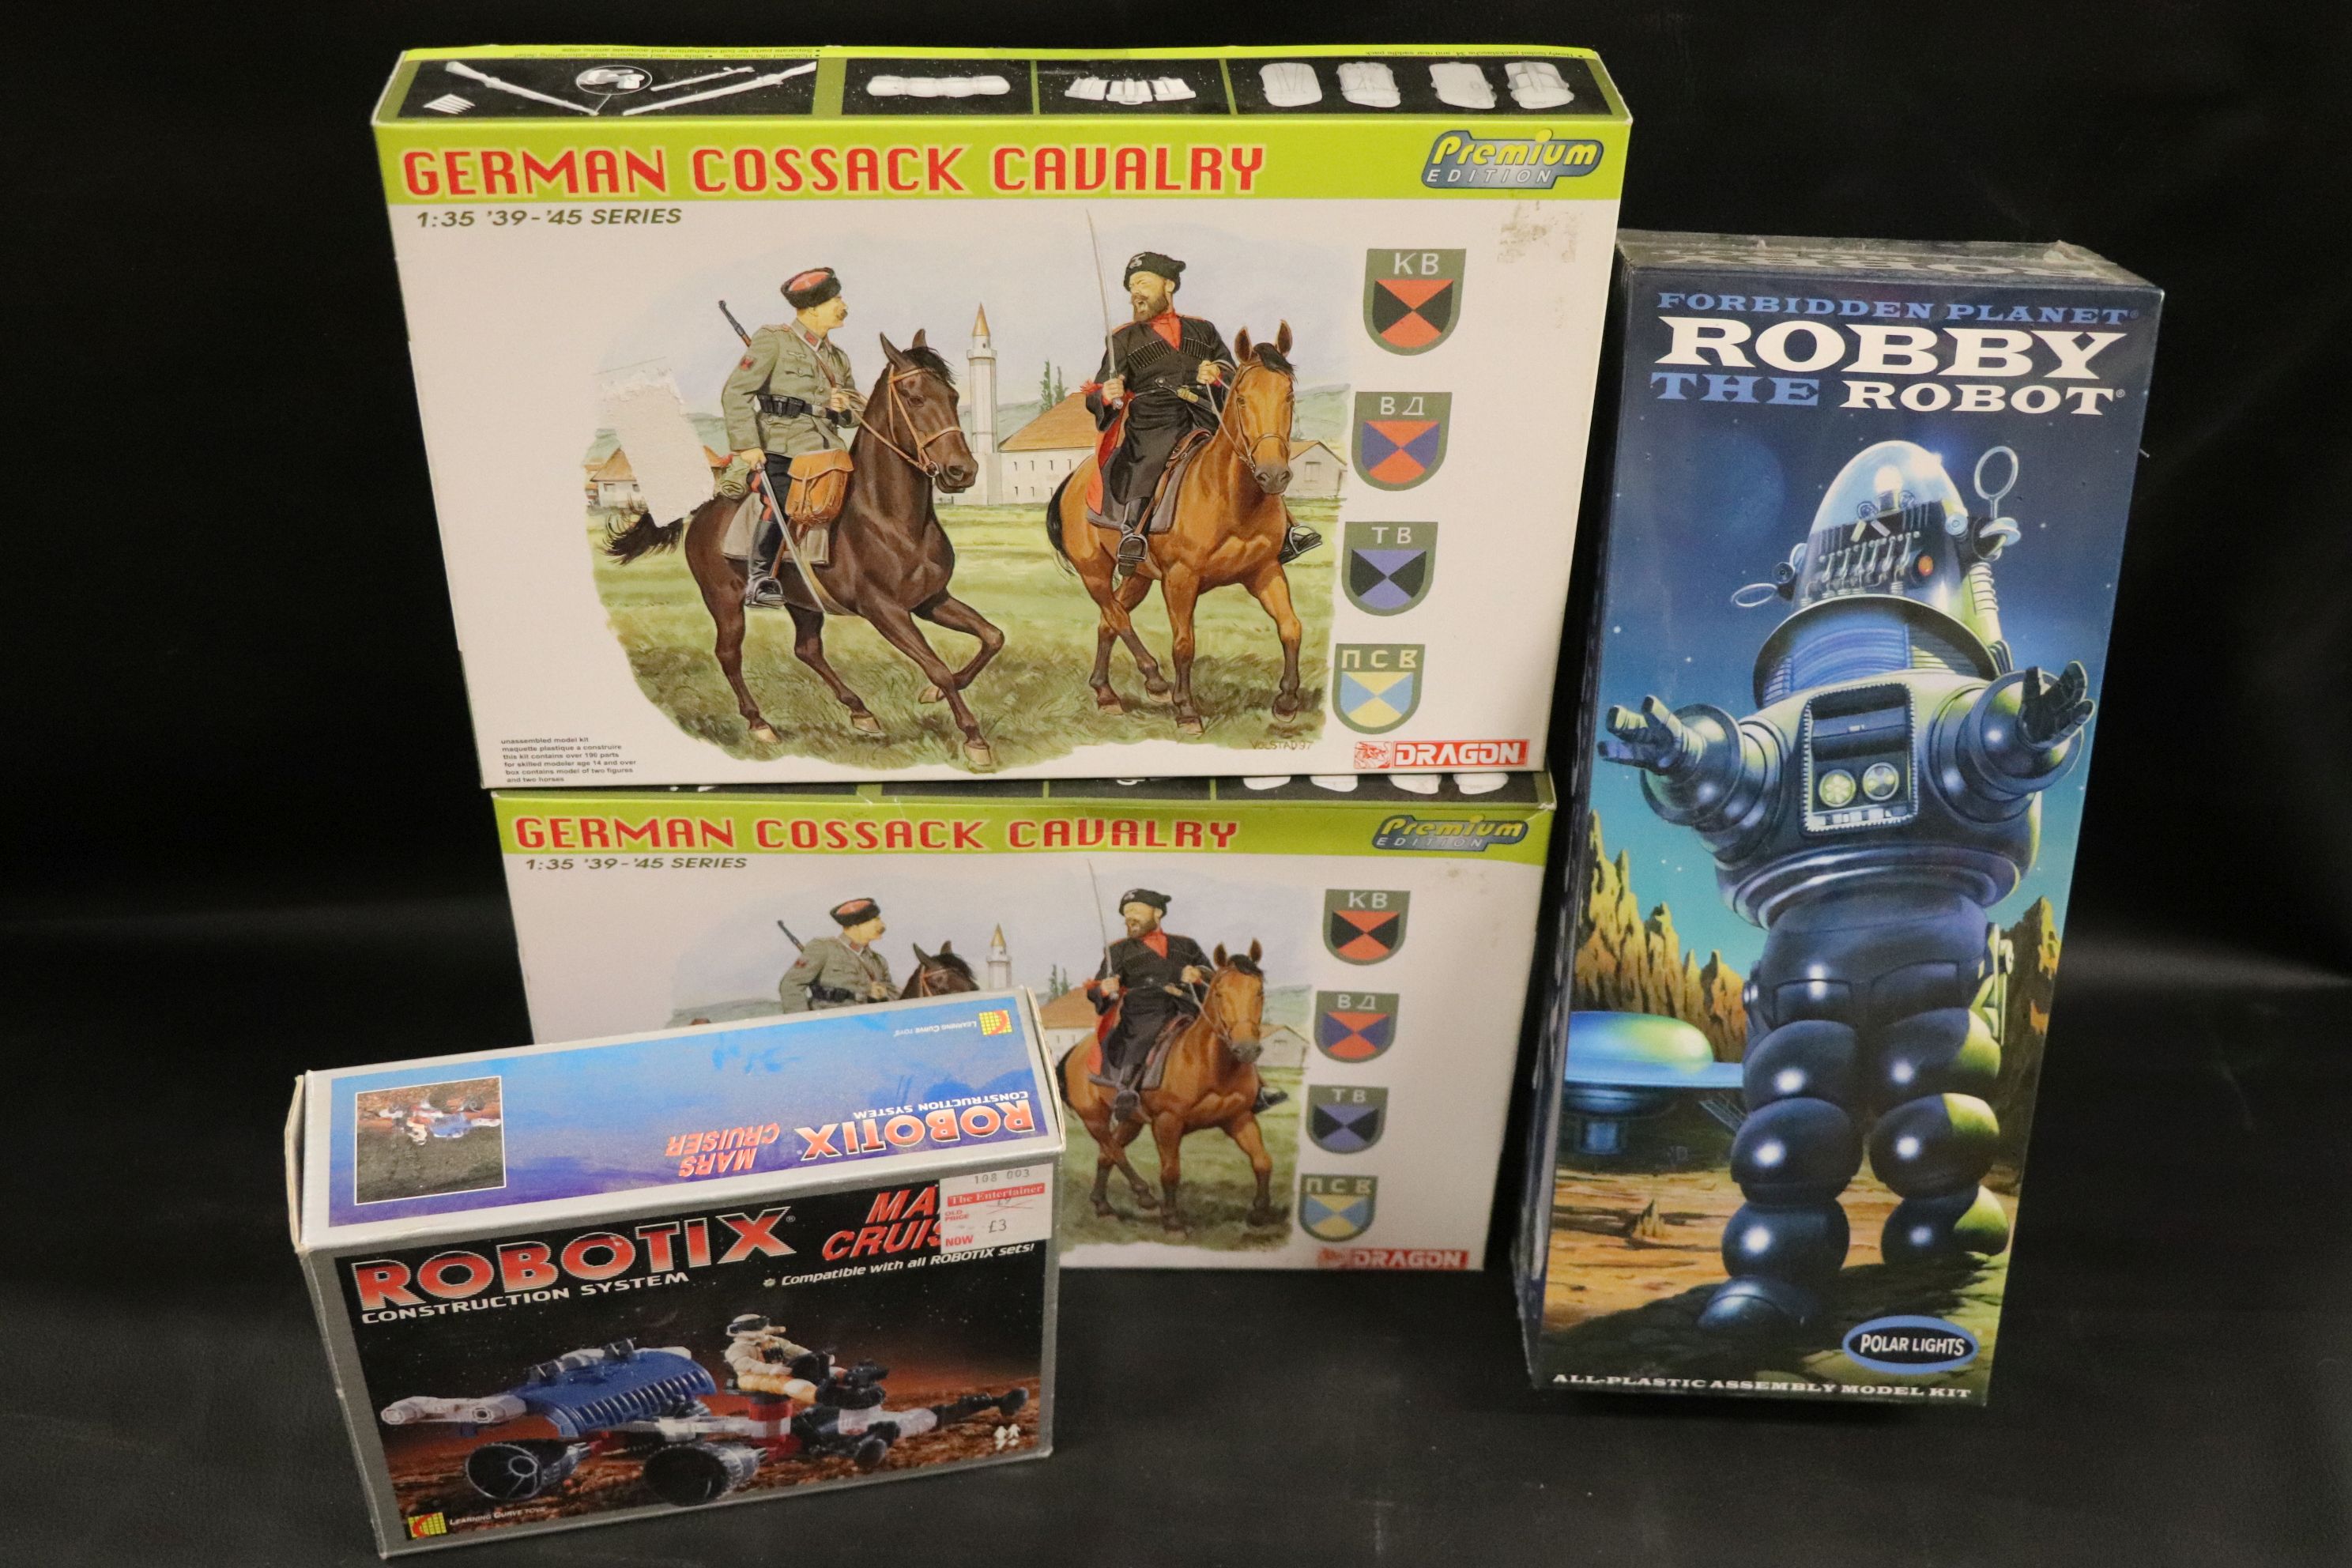 Two Boxed Dragon German Cossack Cavalry Model Kits, Polar Lights Boxed and Sealed Forbidden Planet